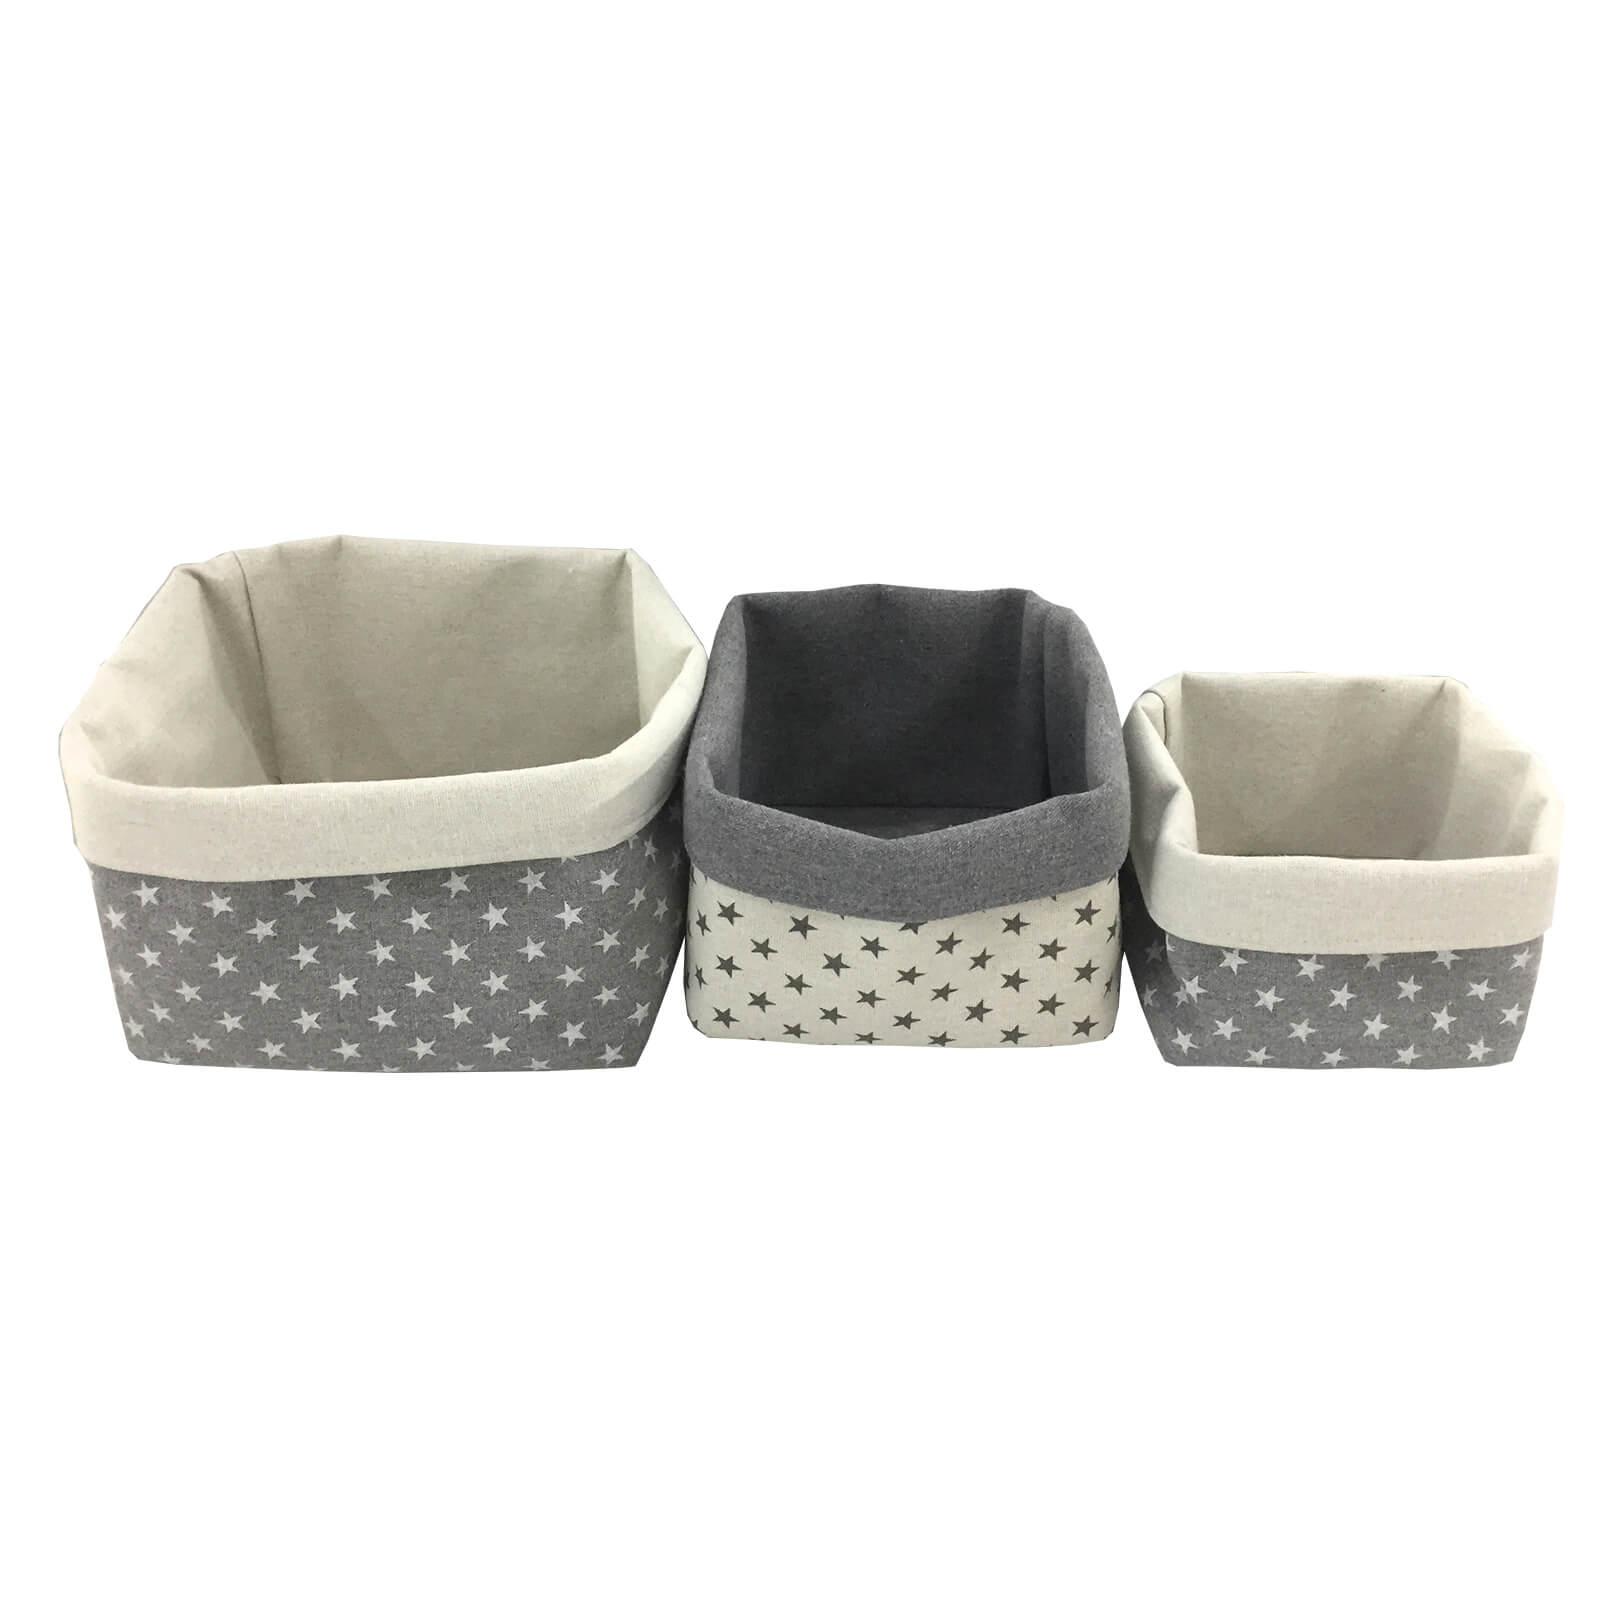 Photo of Storage Basket With Stars - Pack Of 3